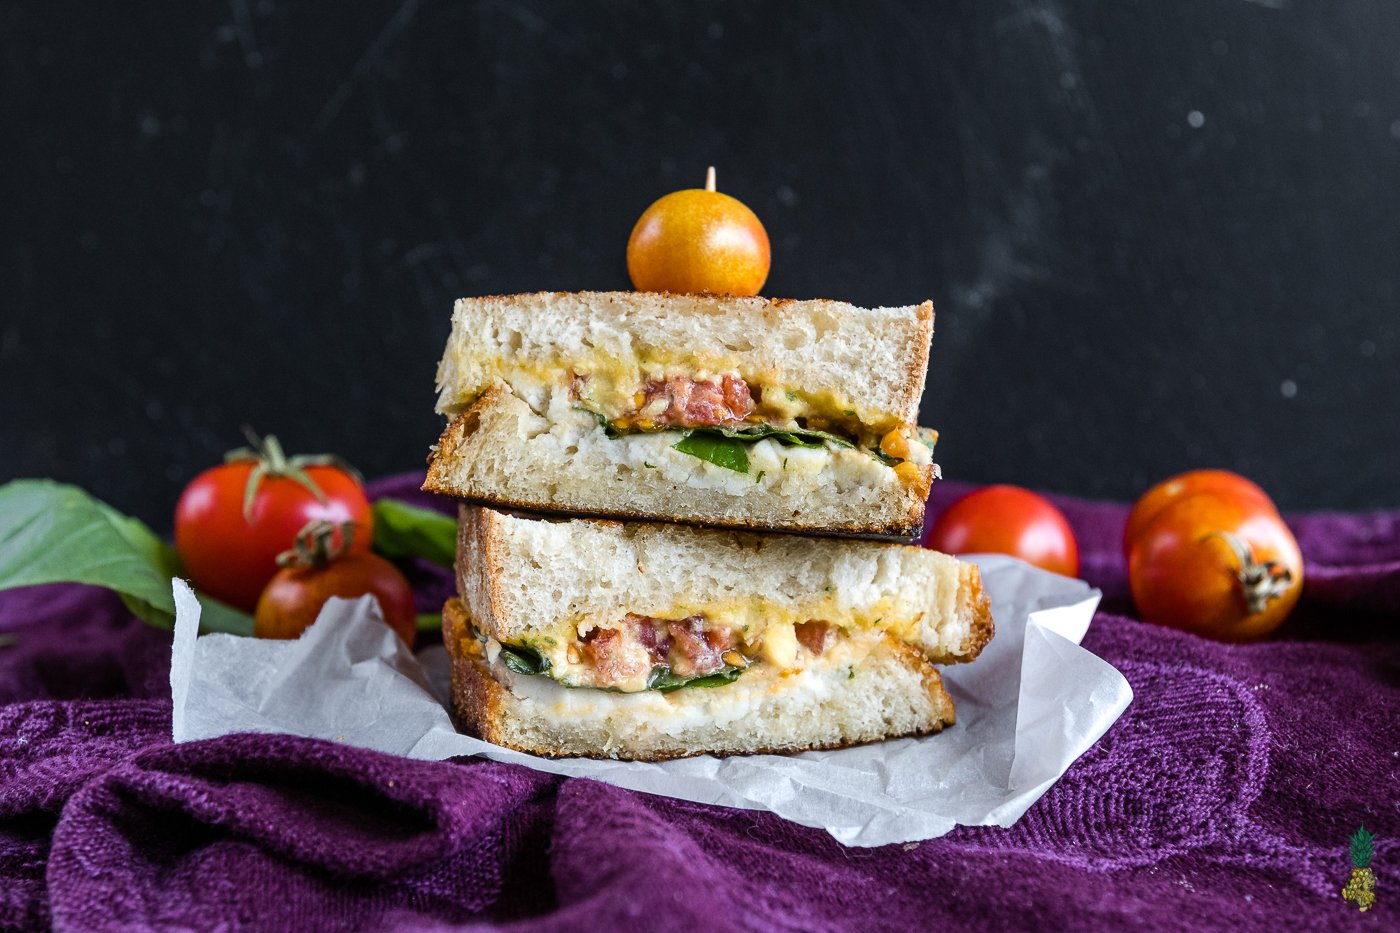 Grilled cheese brought to a whole new level! This vegan caprese grilled cheese will satisfy anyone, vegan or not! It is easy to make, decadent and so dang good! #vegan #caprese #grilledcheese #sandwich #entree #lunch #dinner #vegansandwich #bestvegan #veganized #italian